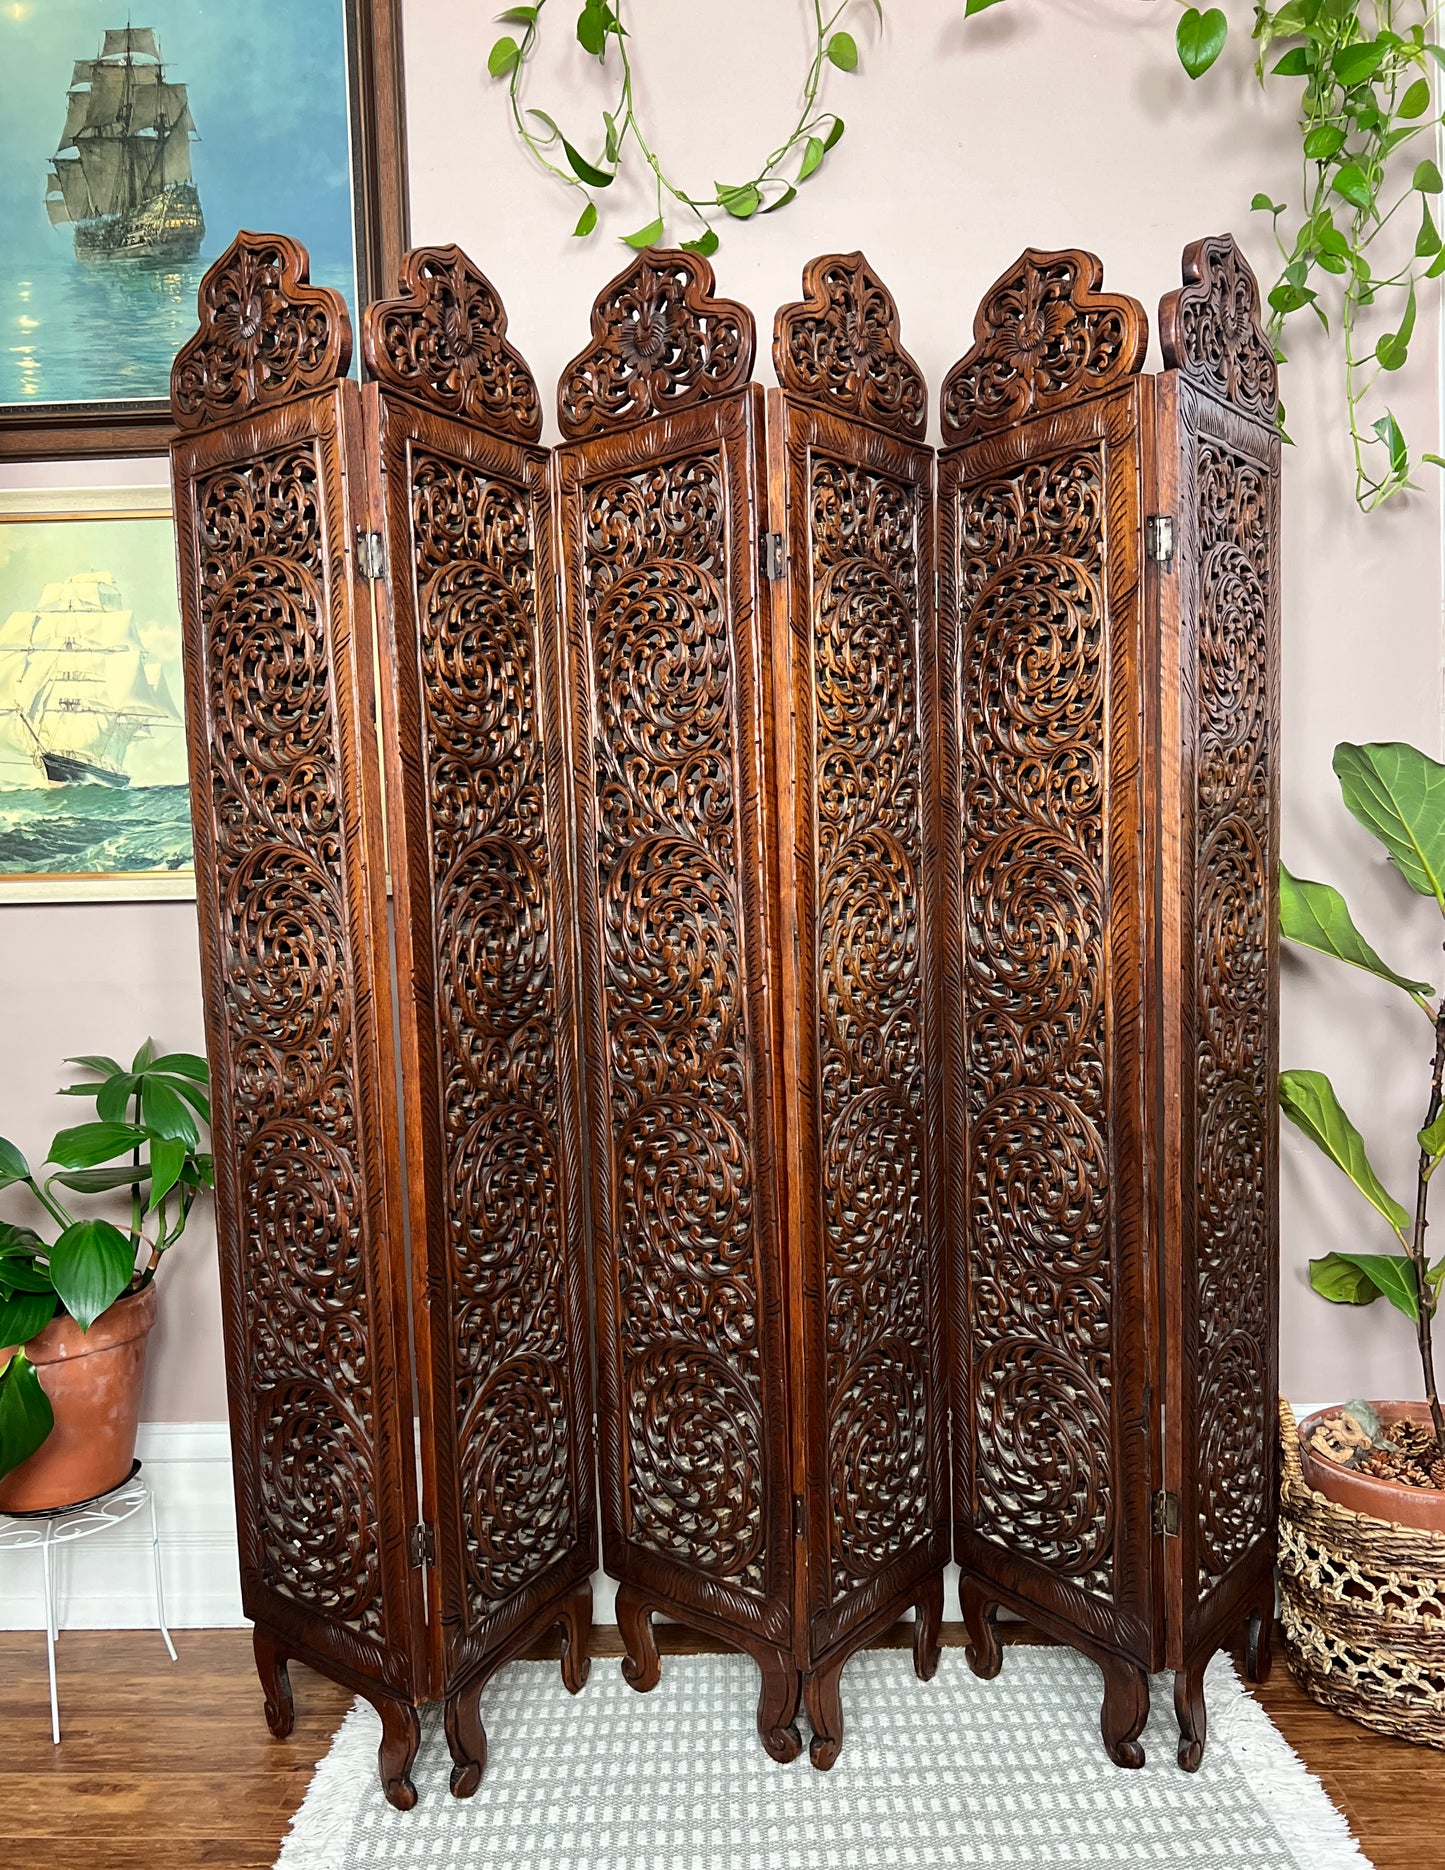 The Bhabra Room Dividers